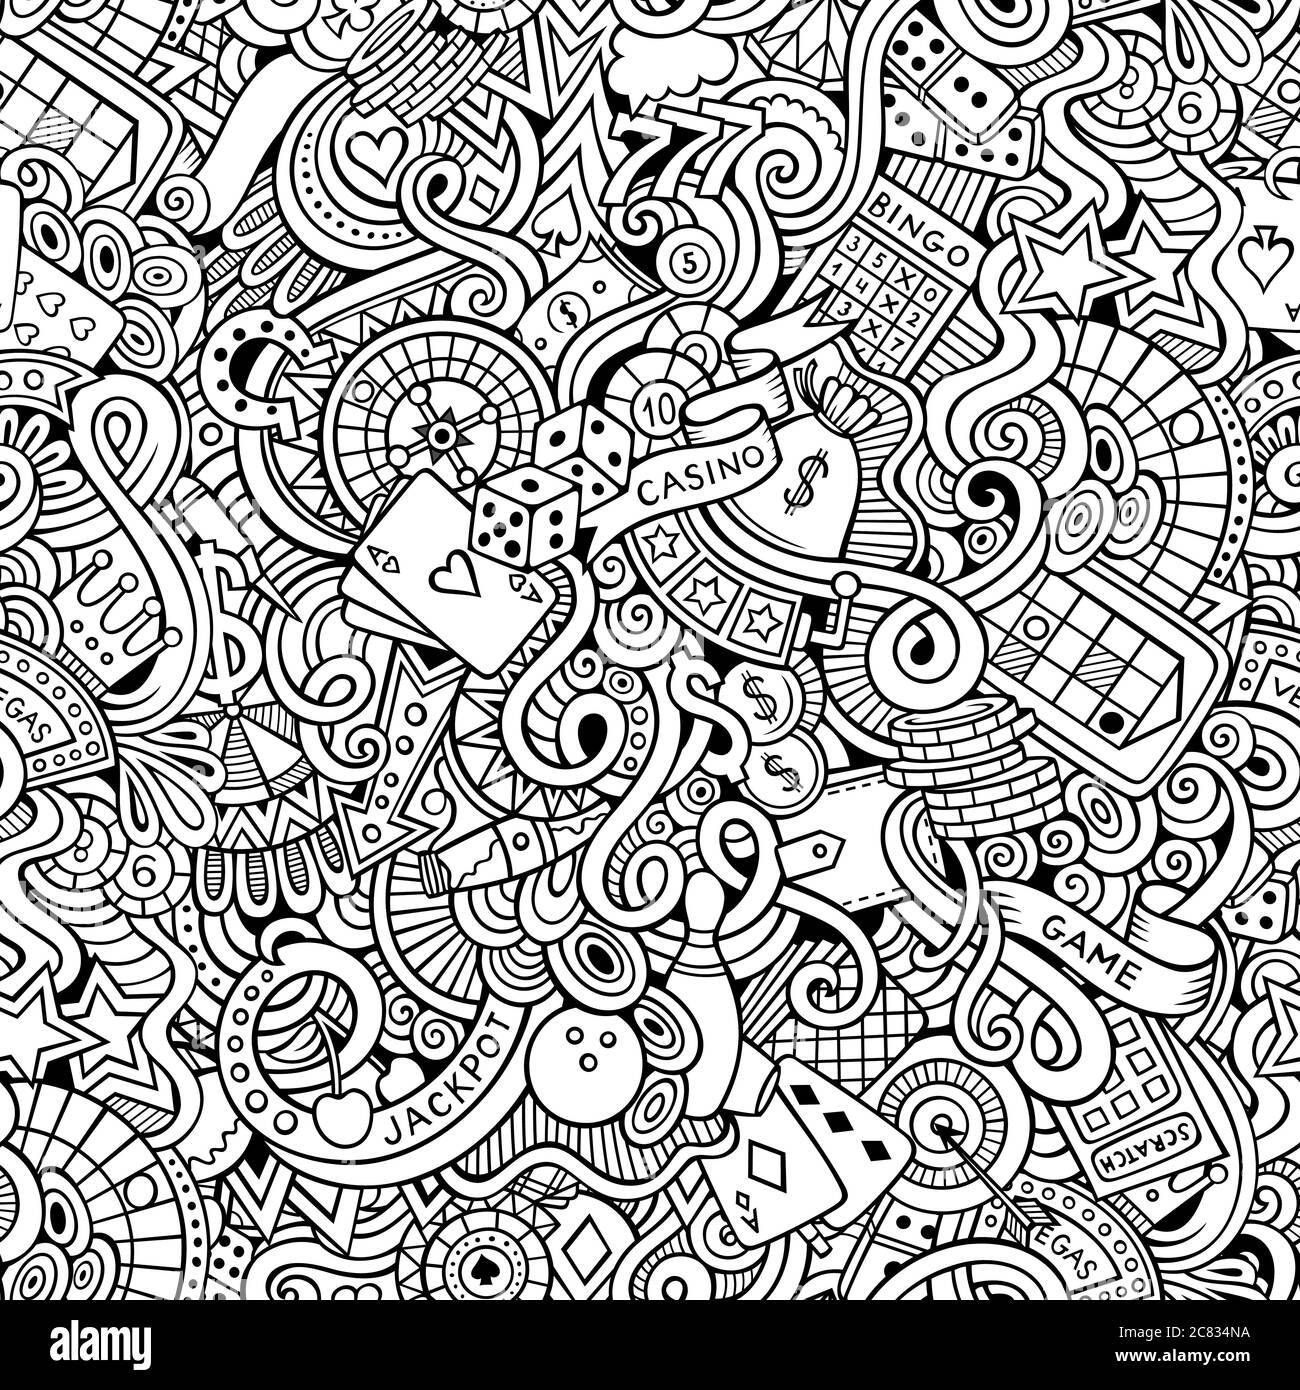 Cartoon hand-drawn doodles on the subject of casino style Stock Vector